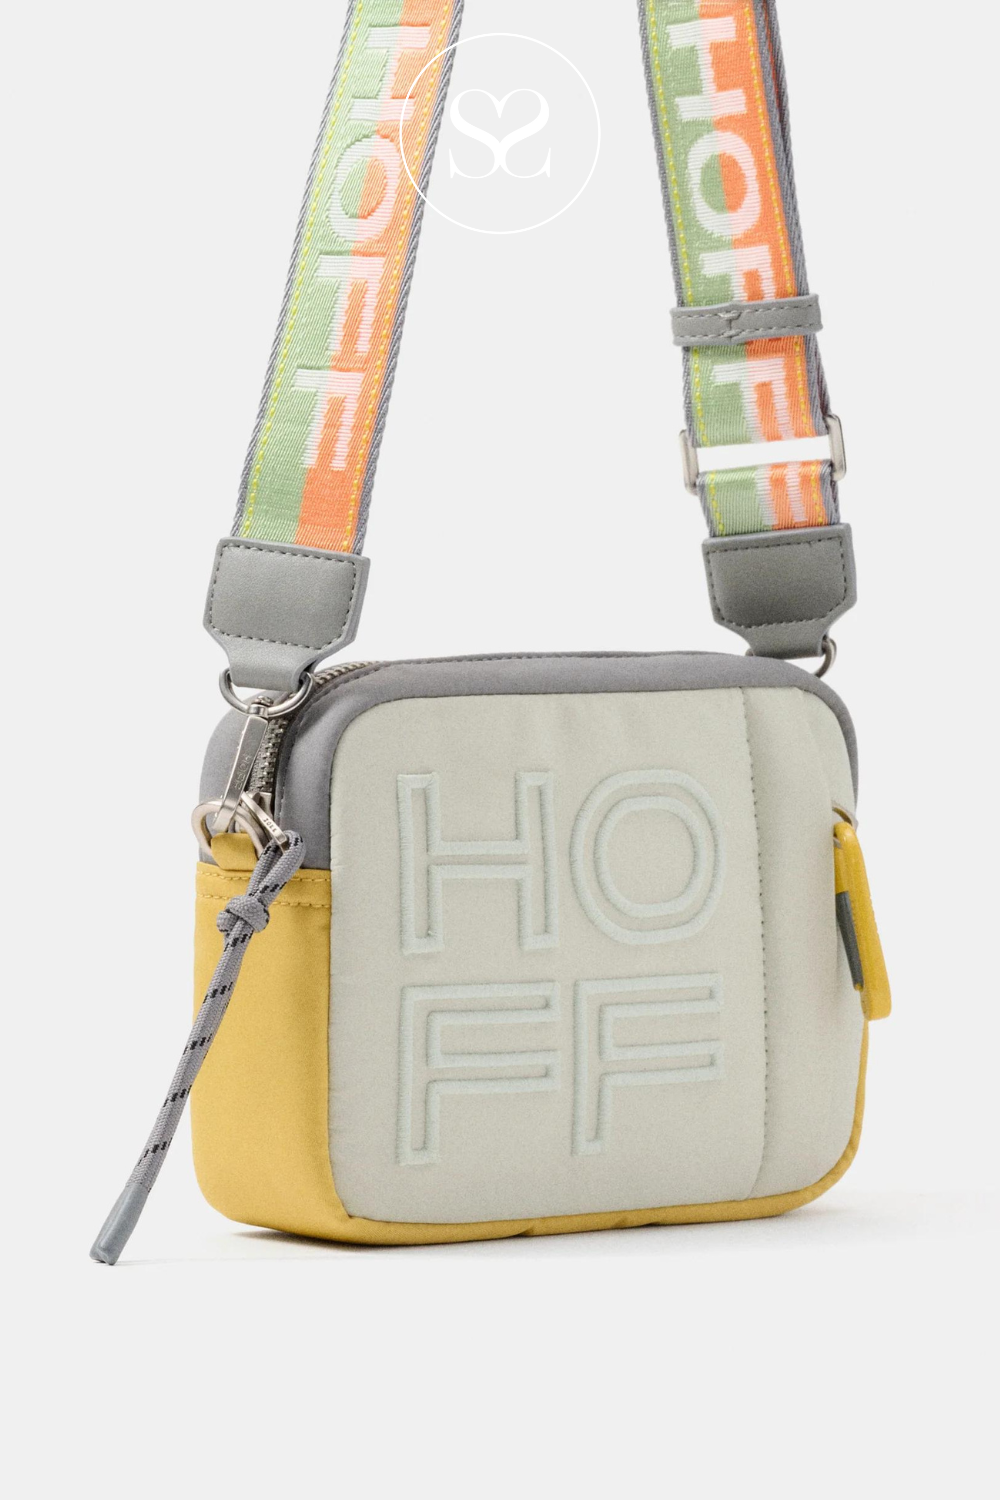 CASUAL EVERYDAY BAG FROM HOFF - GREEN & YELLOW